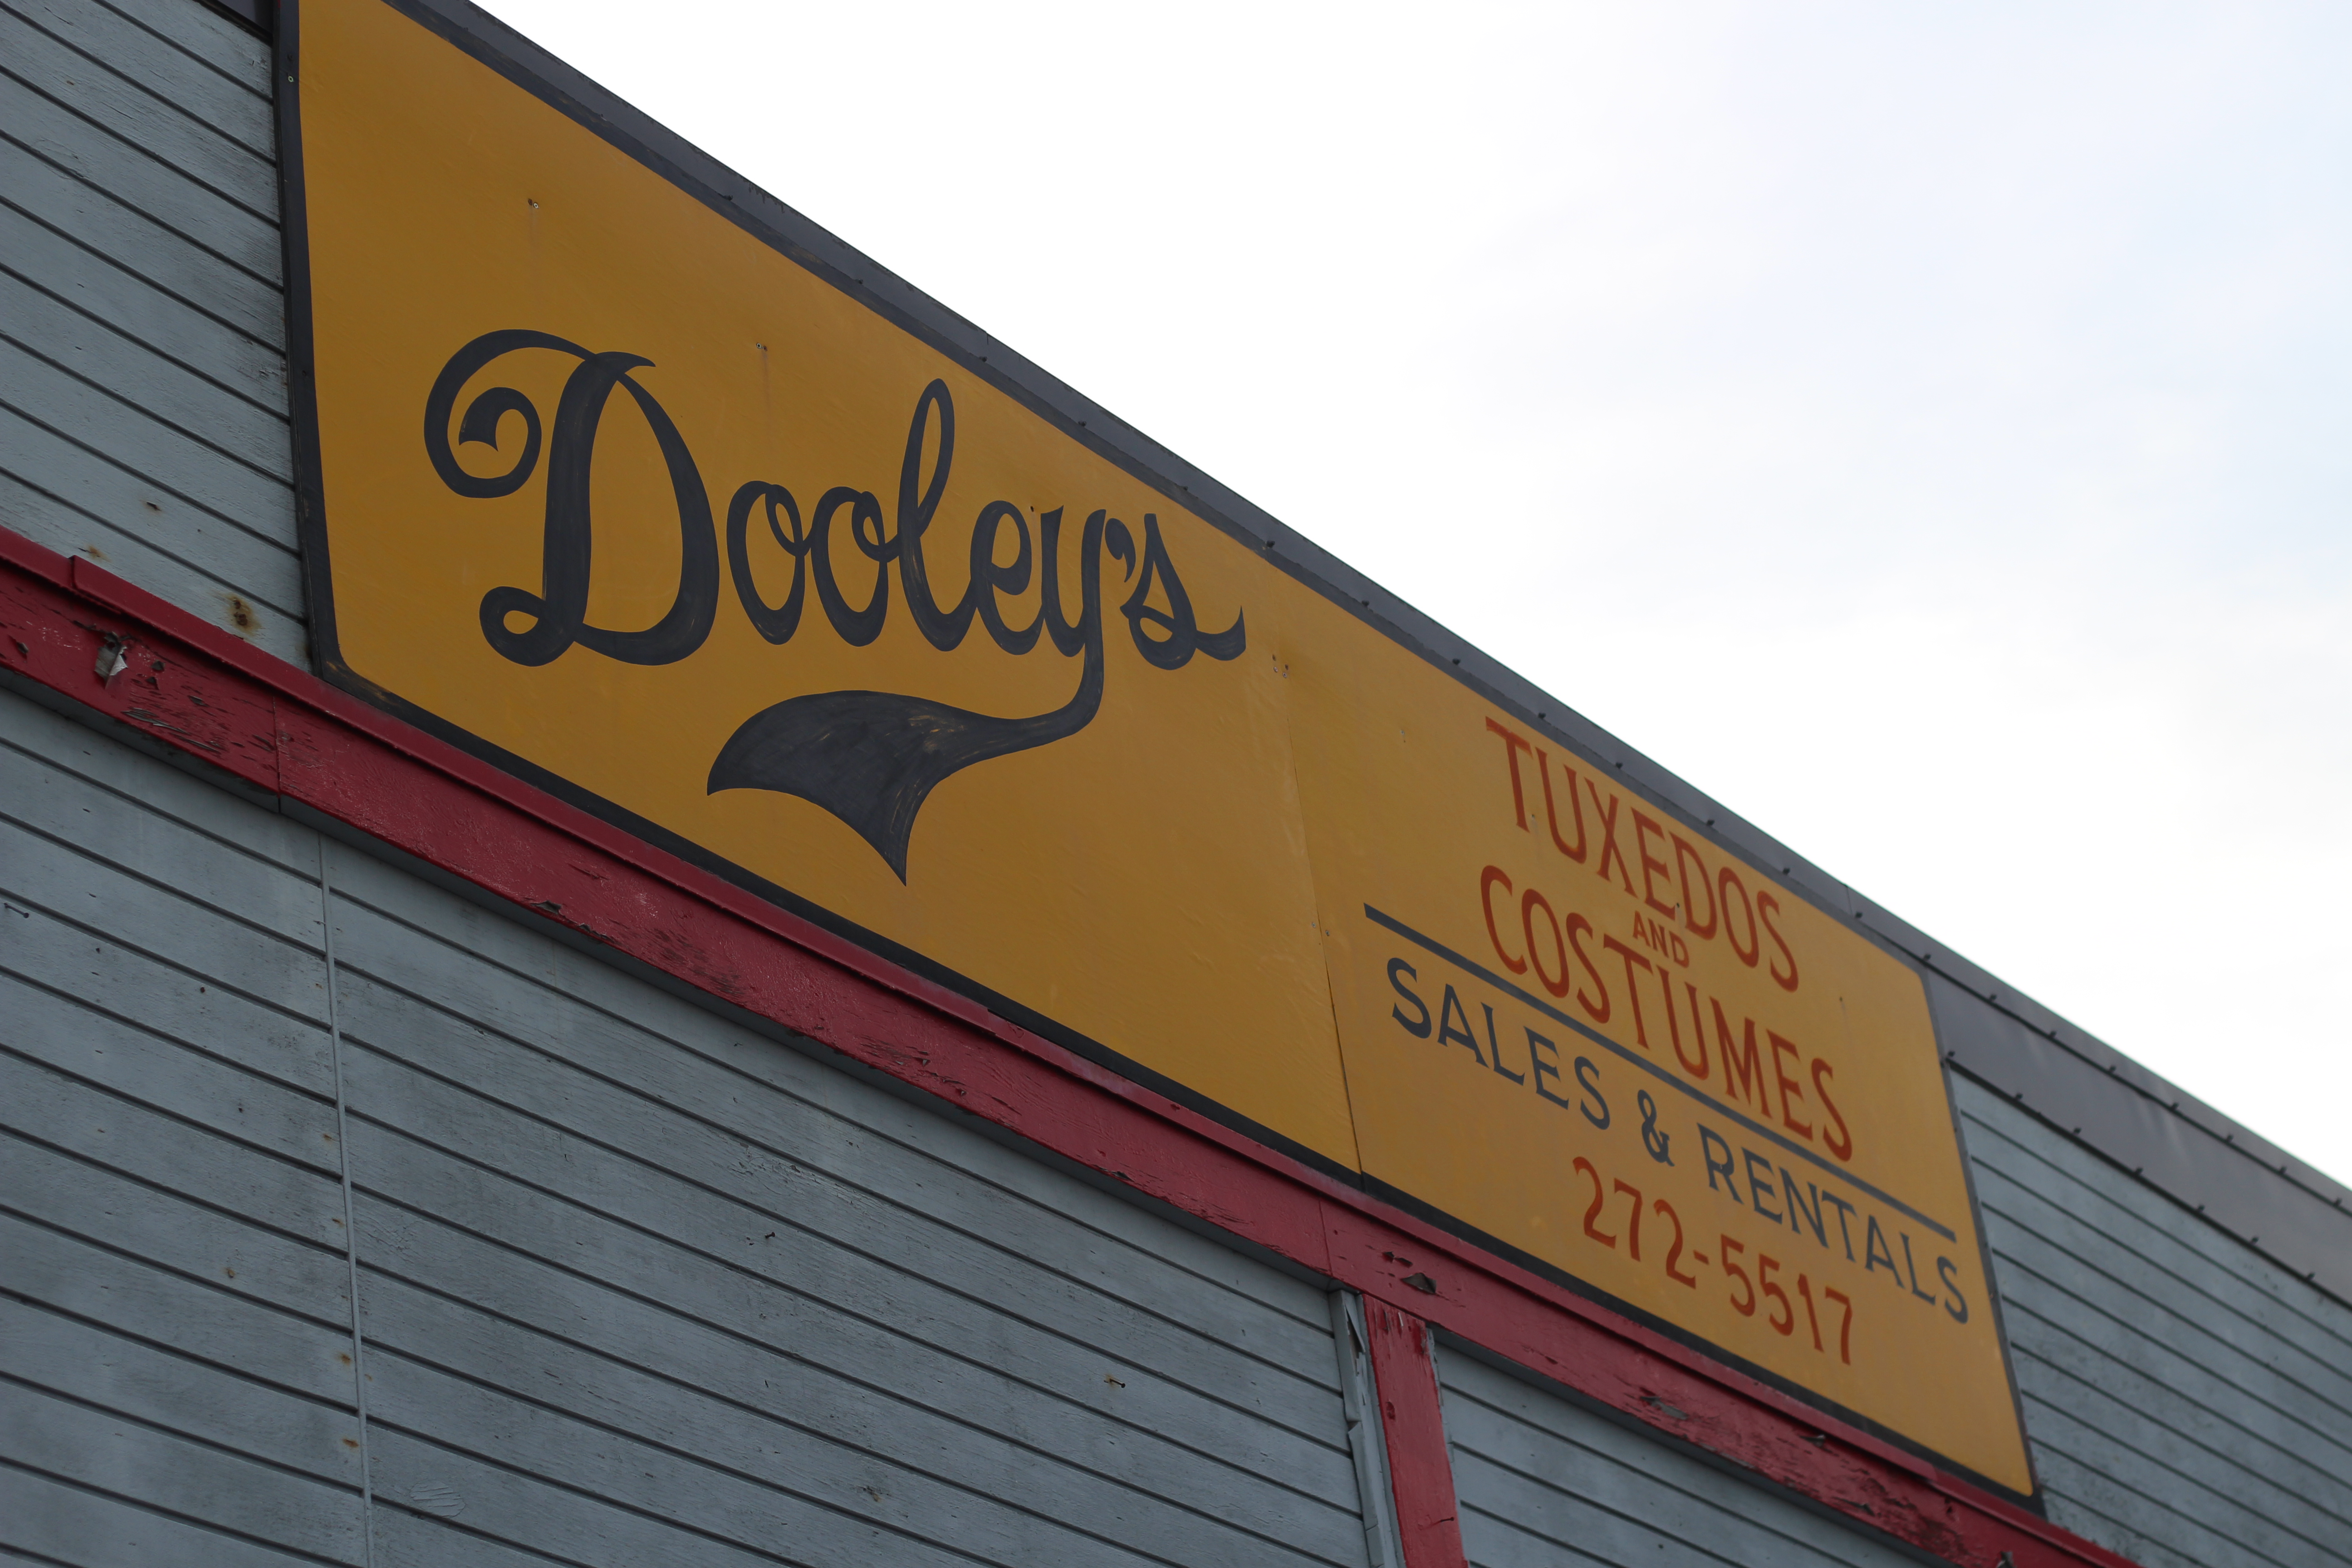 Dooleys Tuxedos and Costumes which will be closing after Halloween 2016 Photo by Wesley Early, Alaska Public Media - Anchorage)